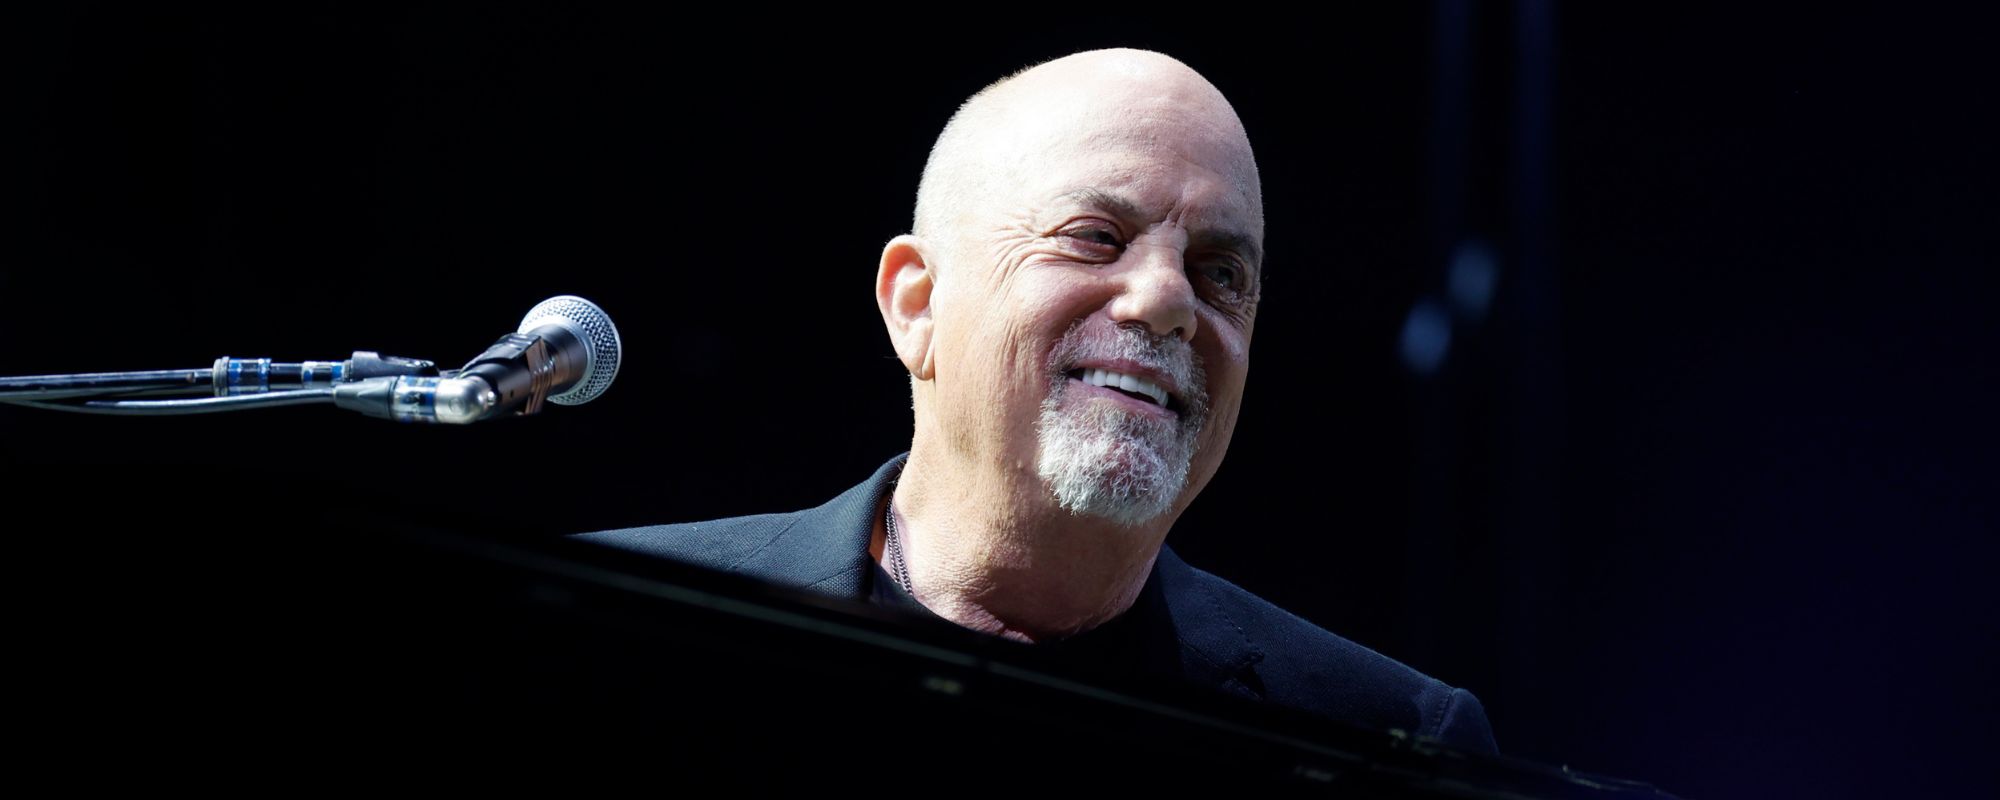 Billy Joel Special To Re-Air Amid Fan Outrage, CBS Issues Apology